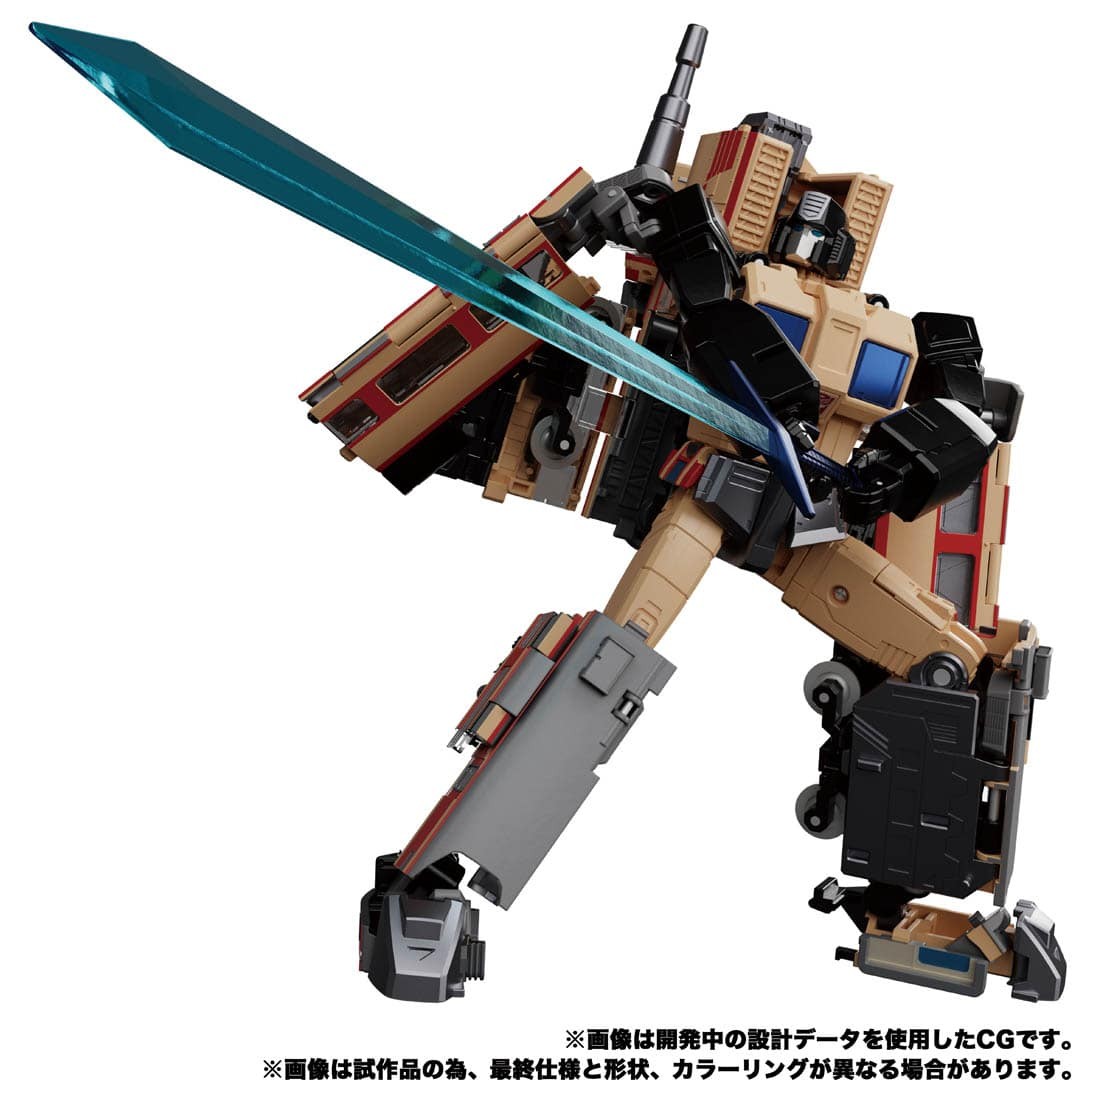 Transformers News: Masterpiece G MPG-05 Seizan gets Fully Revealed